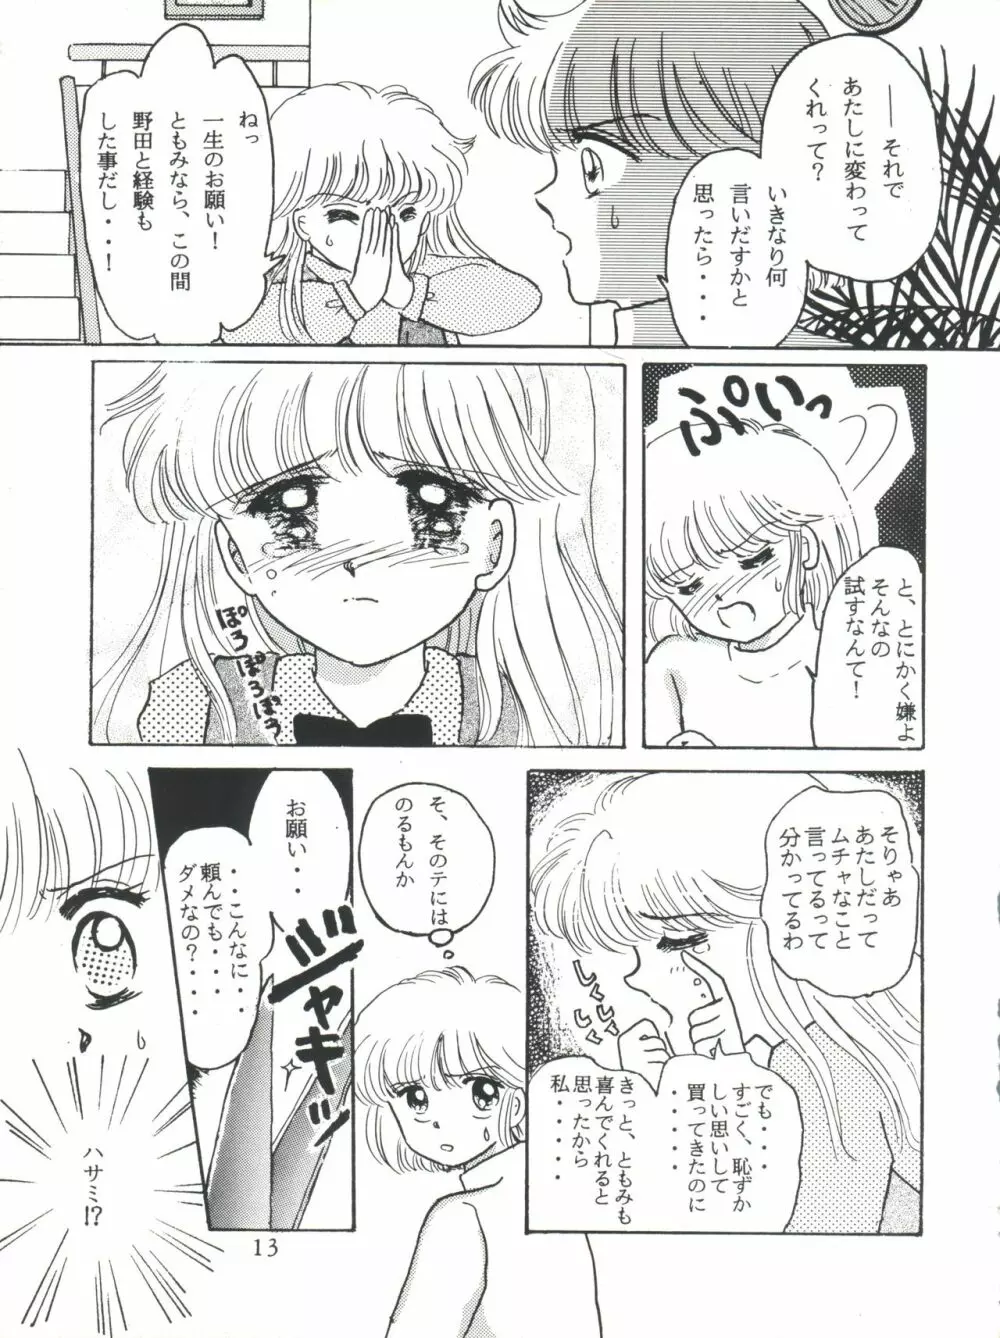 MILKY GIRLS - page13